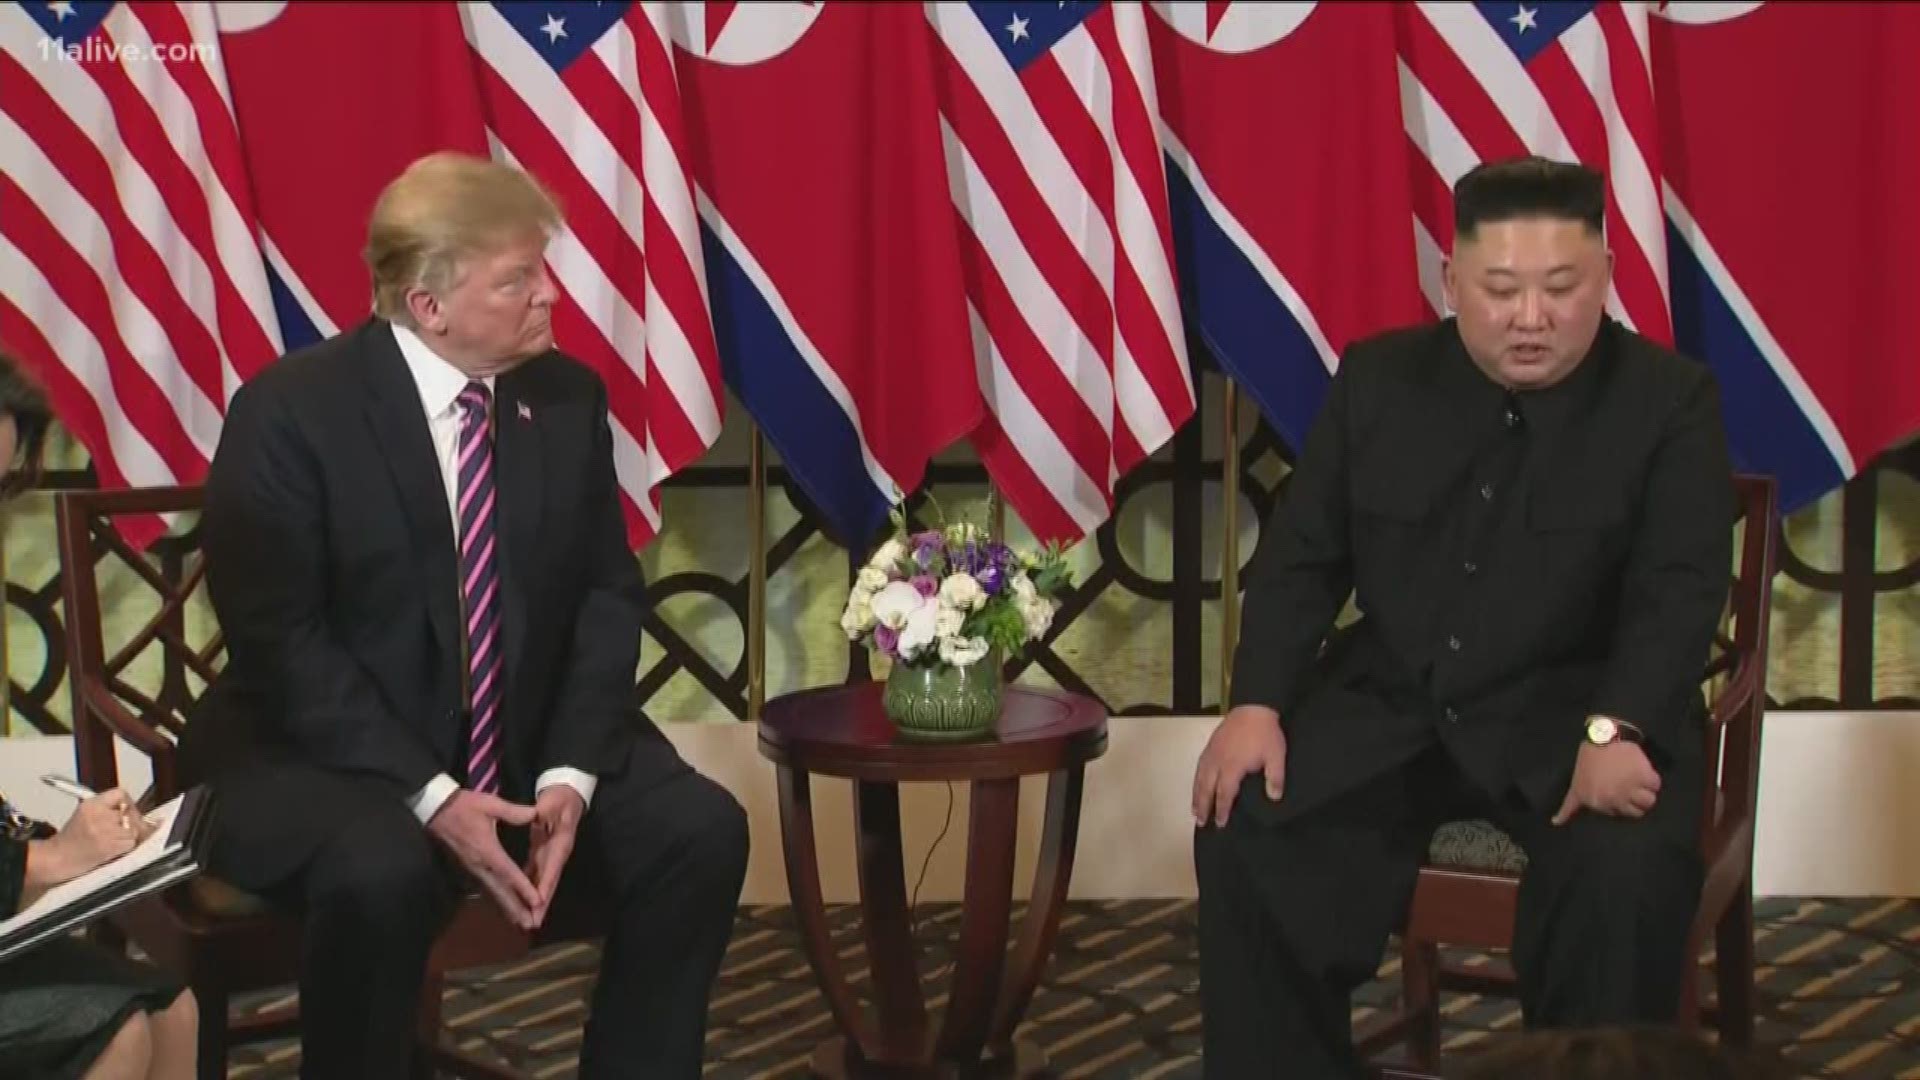 U.S. President Donald Trump meets with North Korean President Kim Jong Un for their second nuclear summit